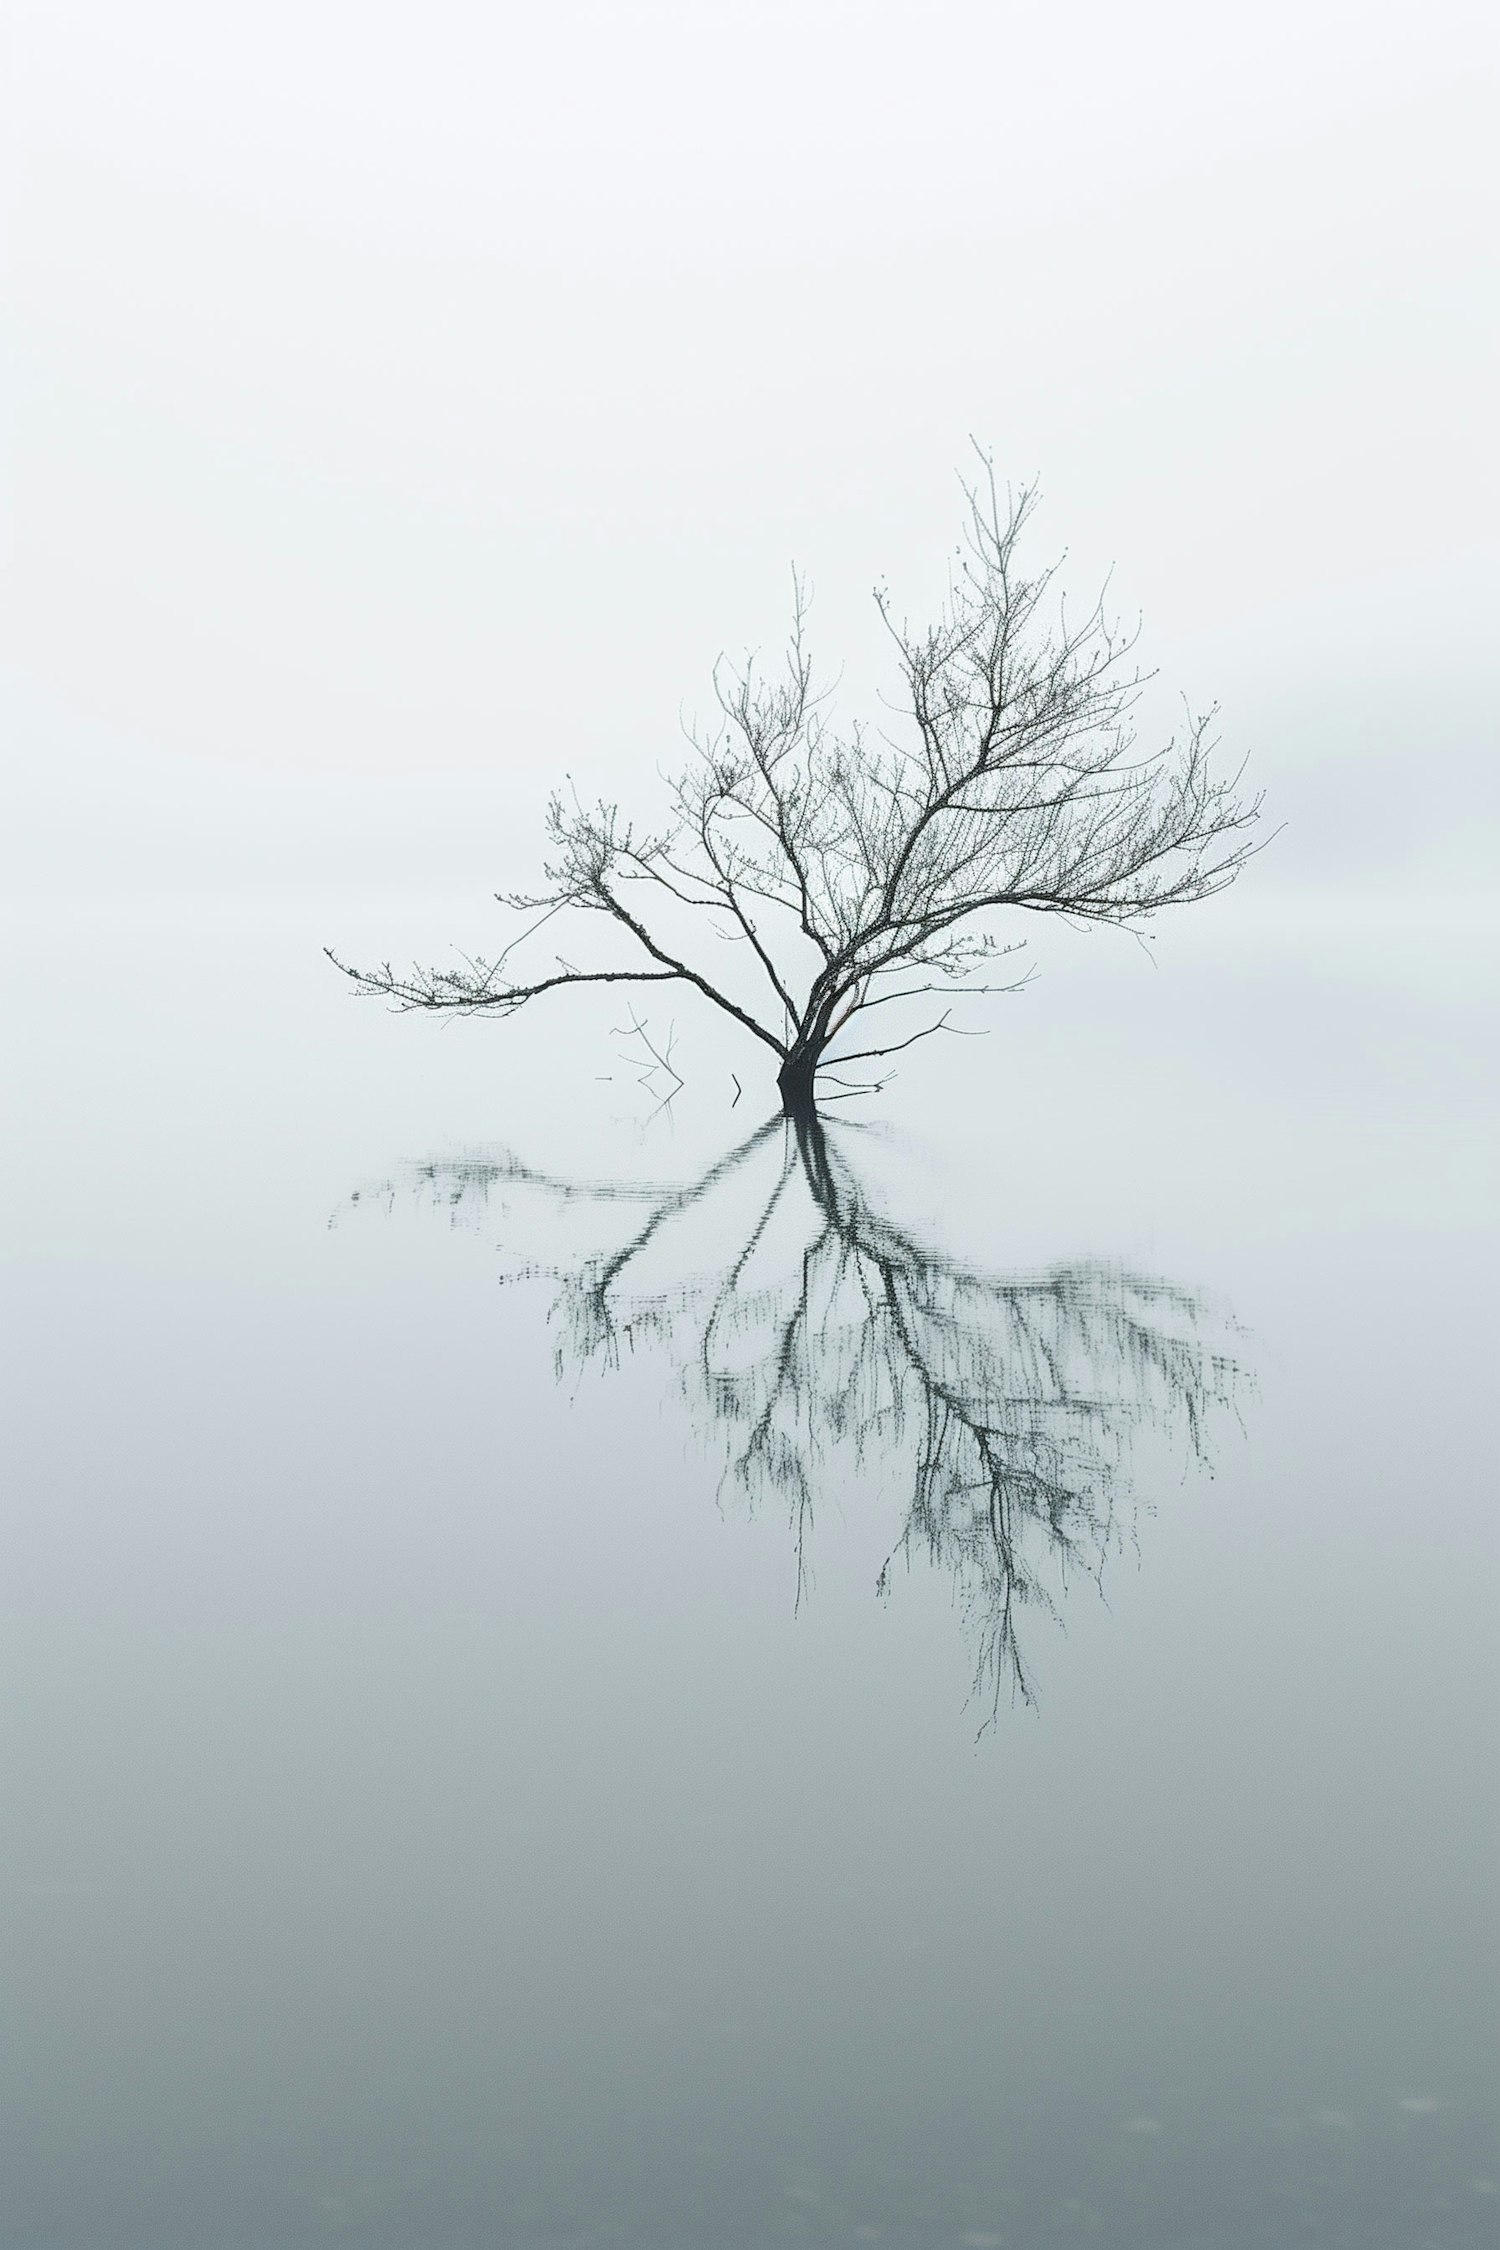 Solitary Tree in Mist